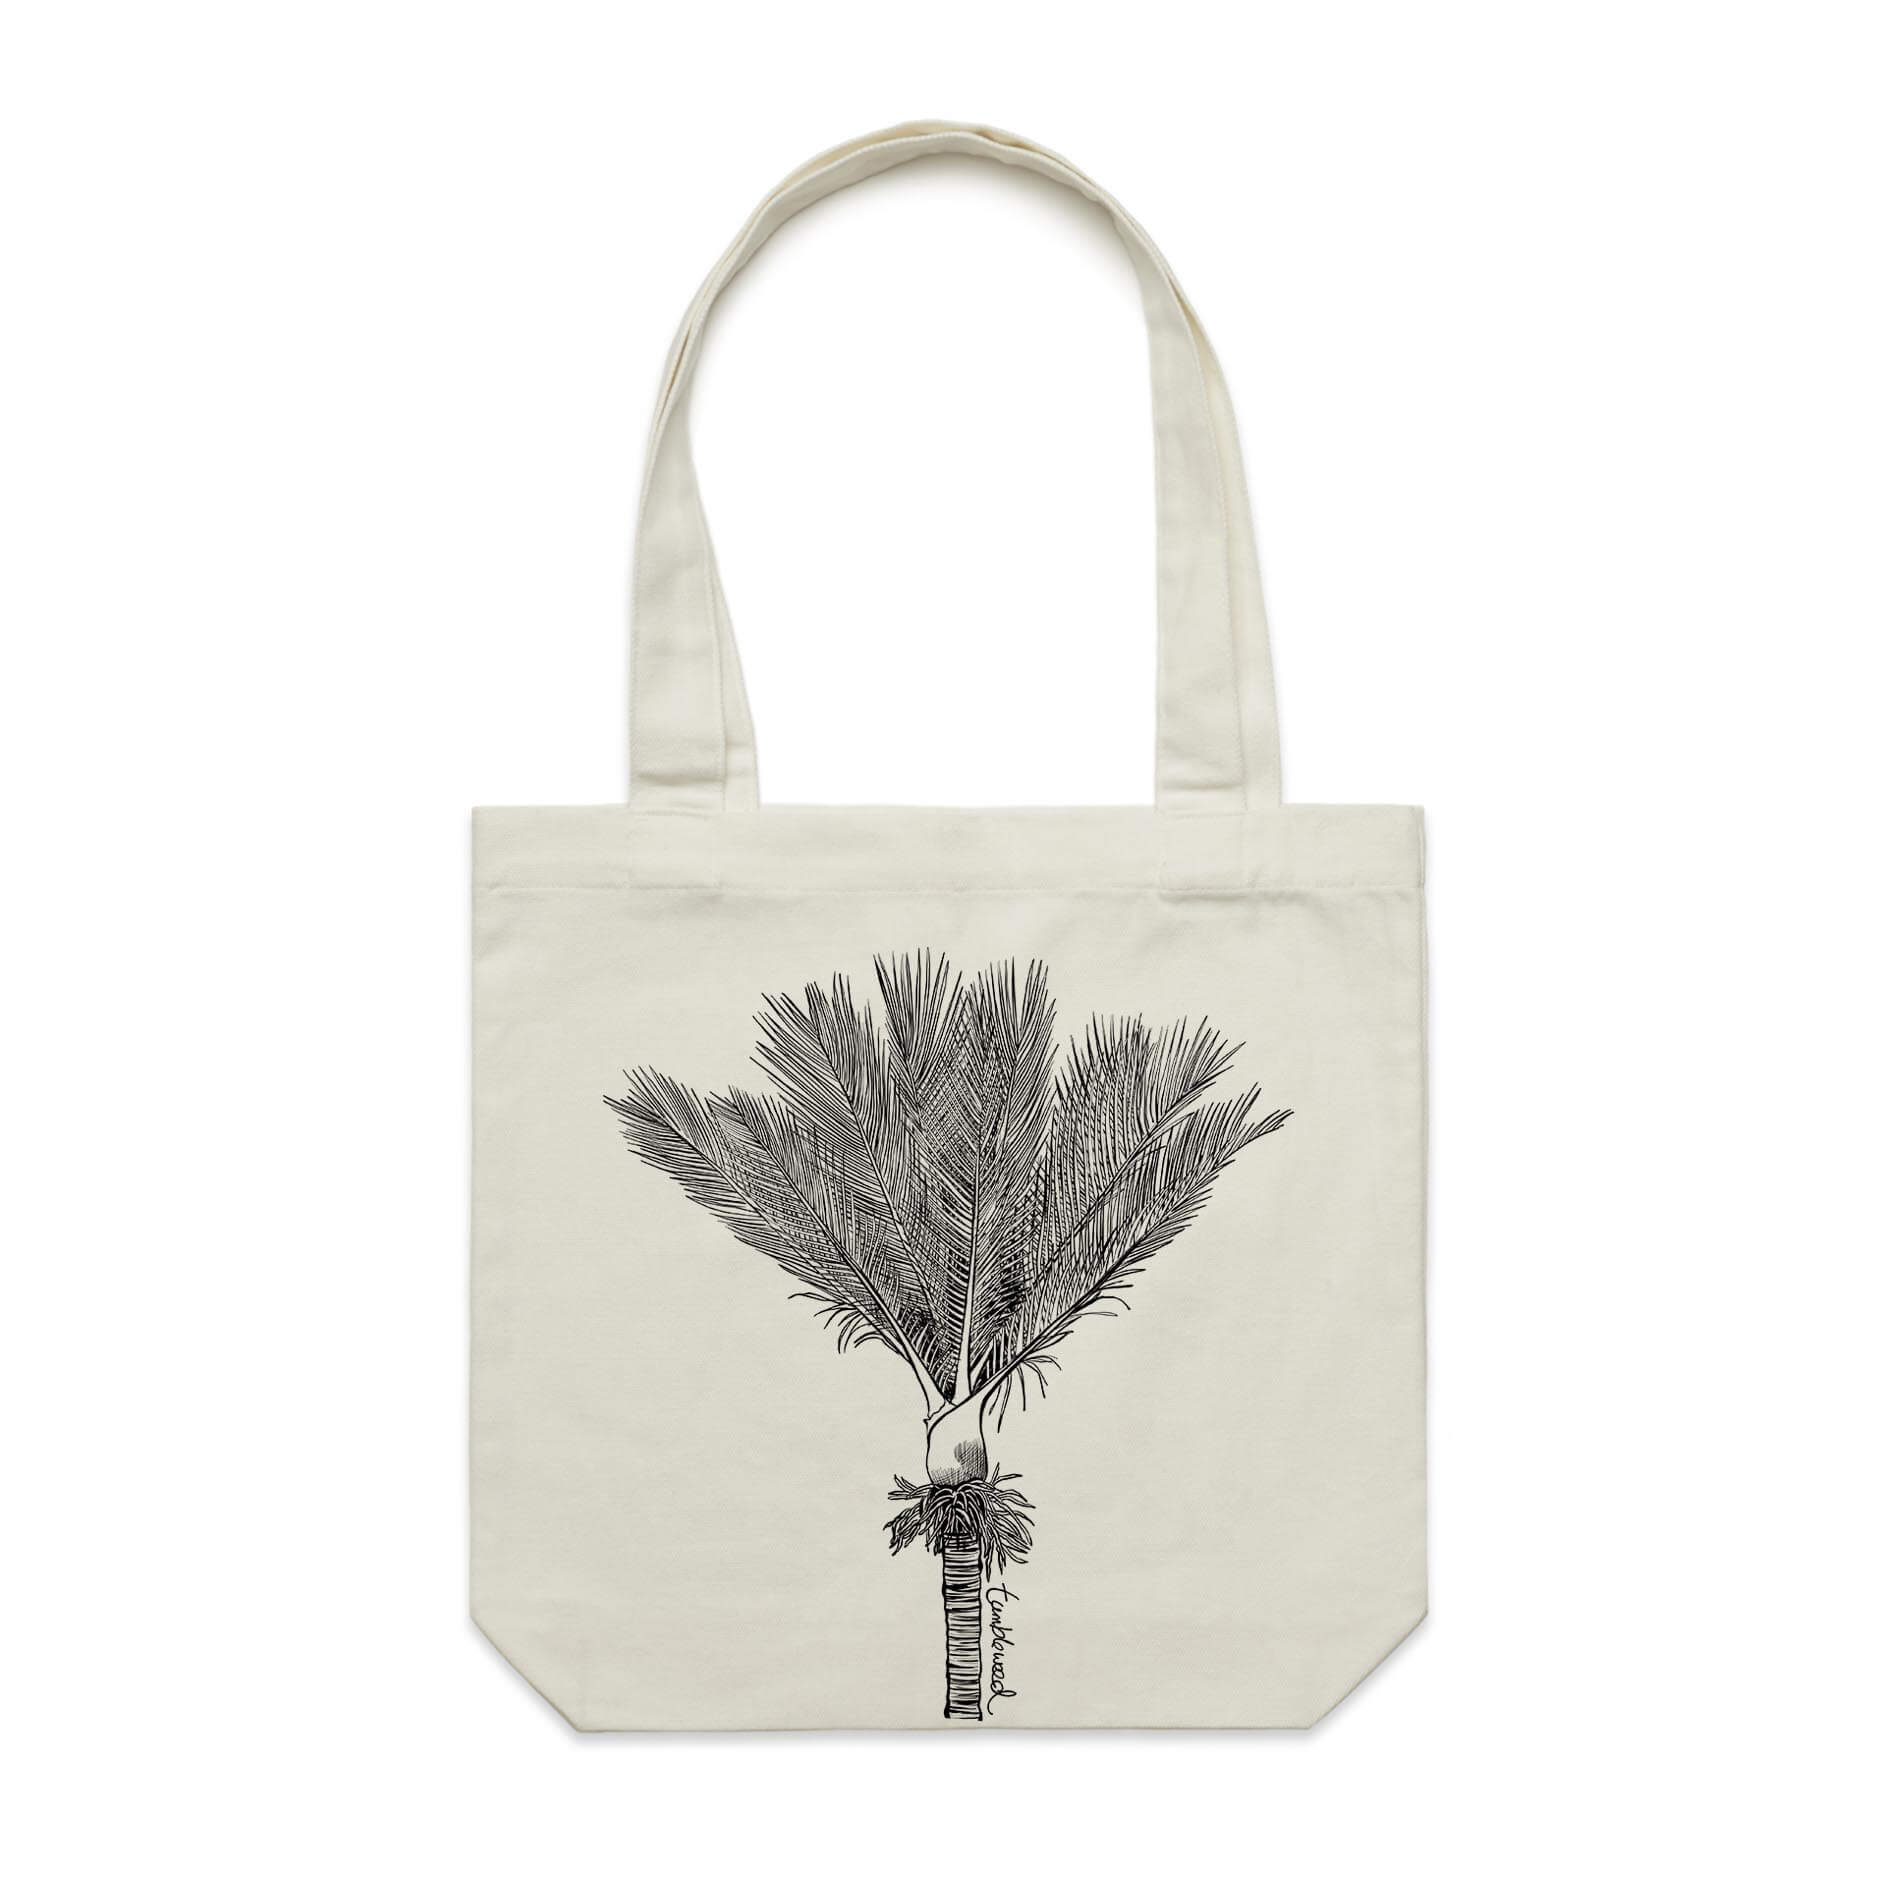 Cotton canvas tote bag with a screen printed Nīkau design.